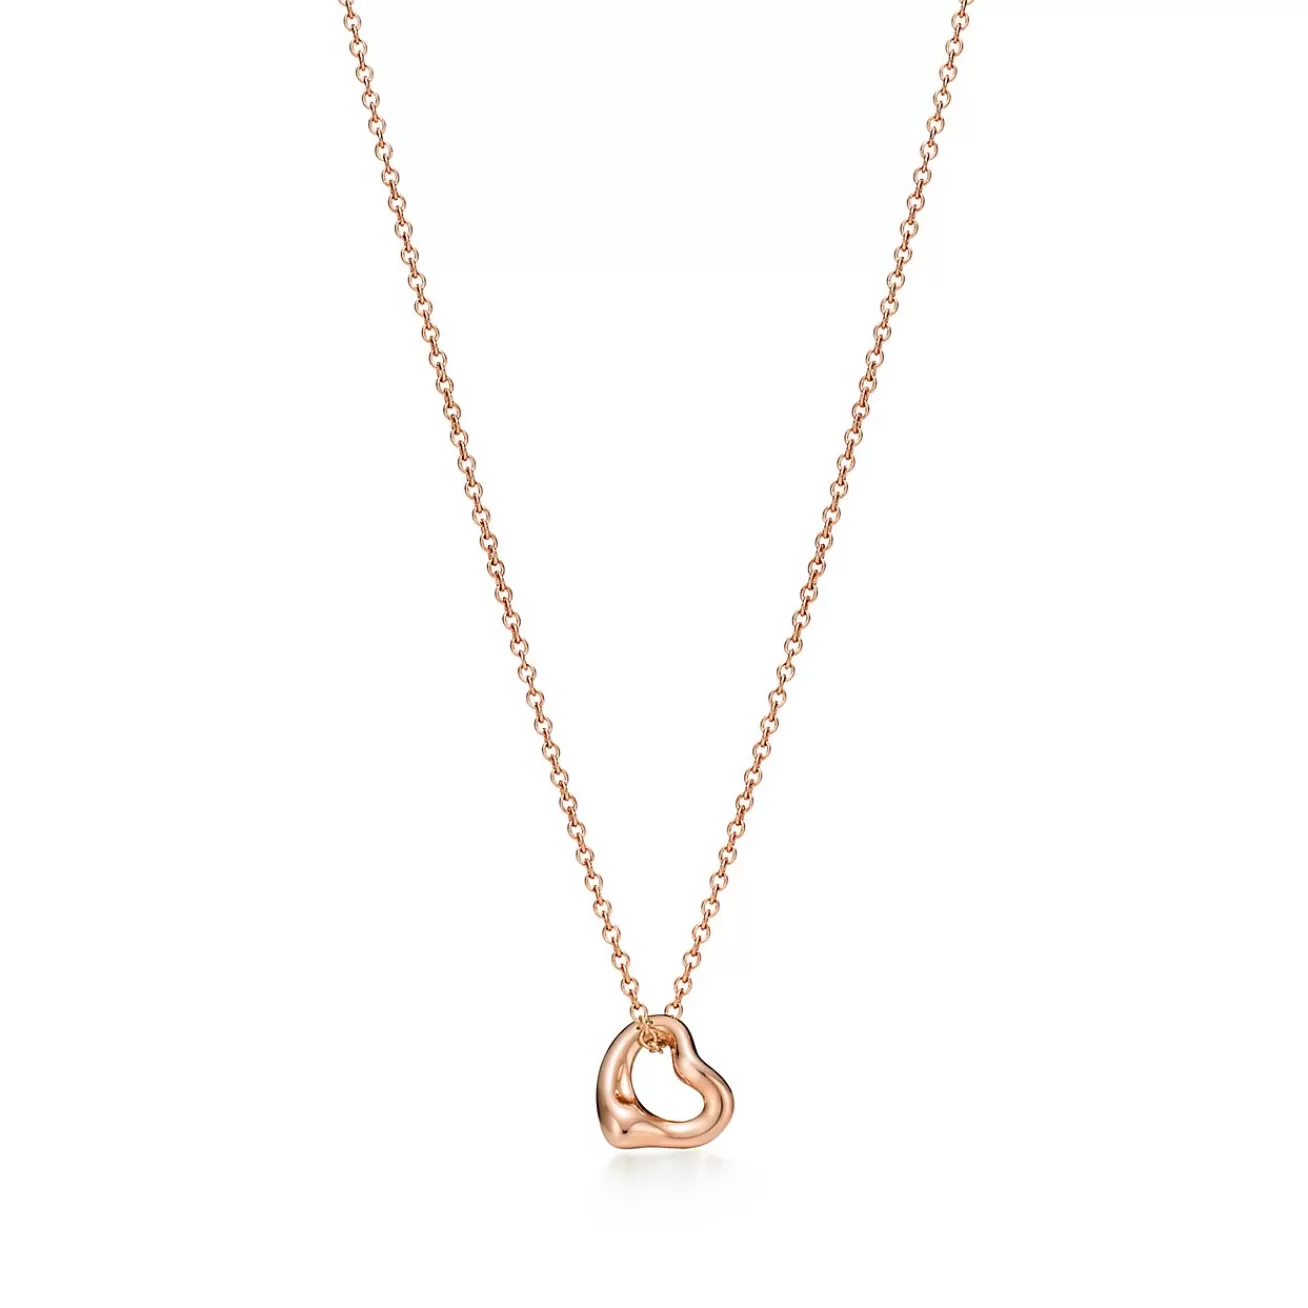 Tiffany & Co. Elsa Peretti® Open Heart Pendant in Rose Gold, 7 mm | ^ Necklaces & Pendants | Rose Gold Jewelry